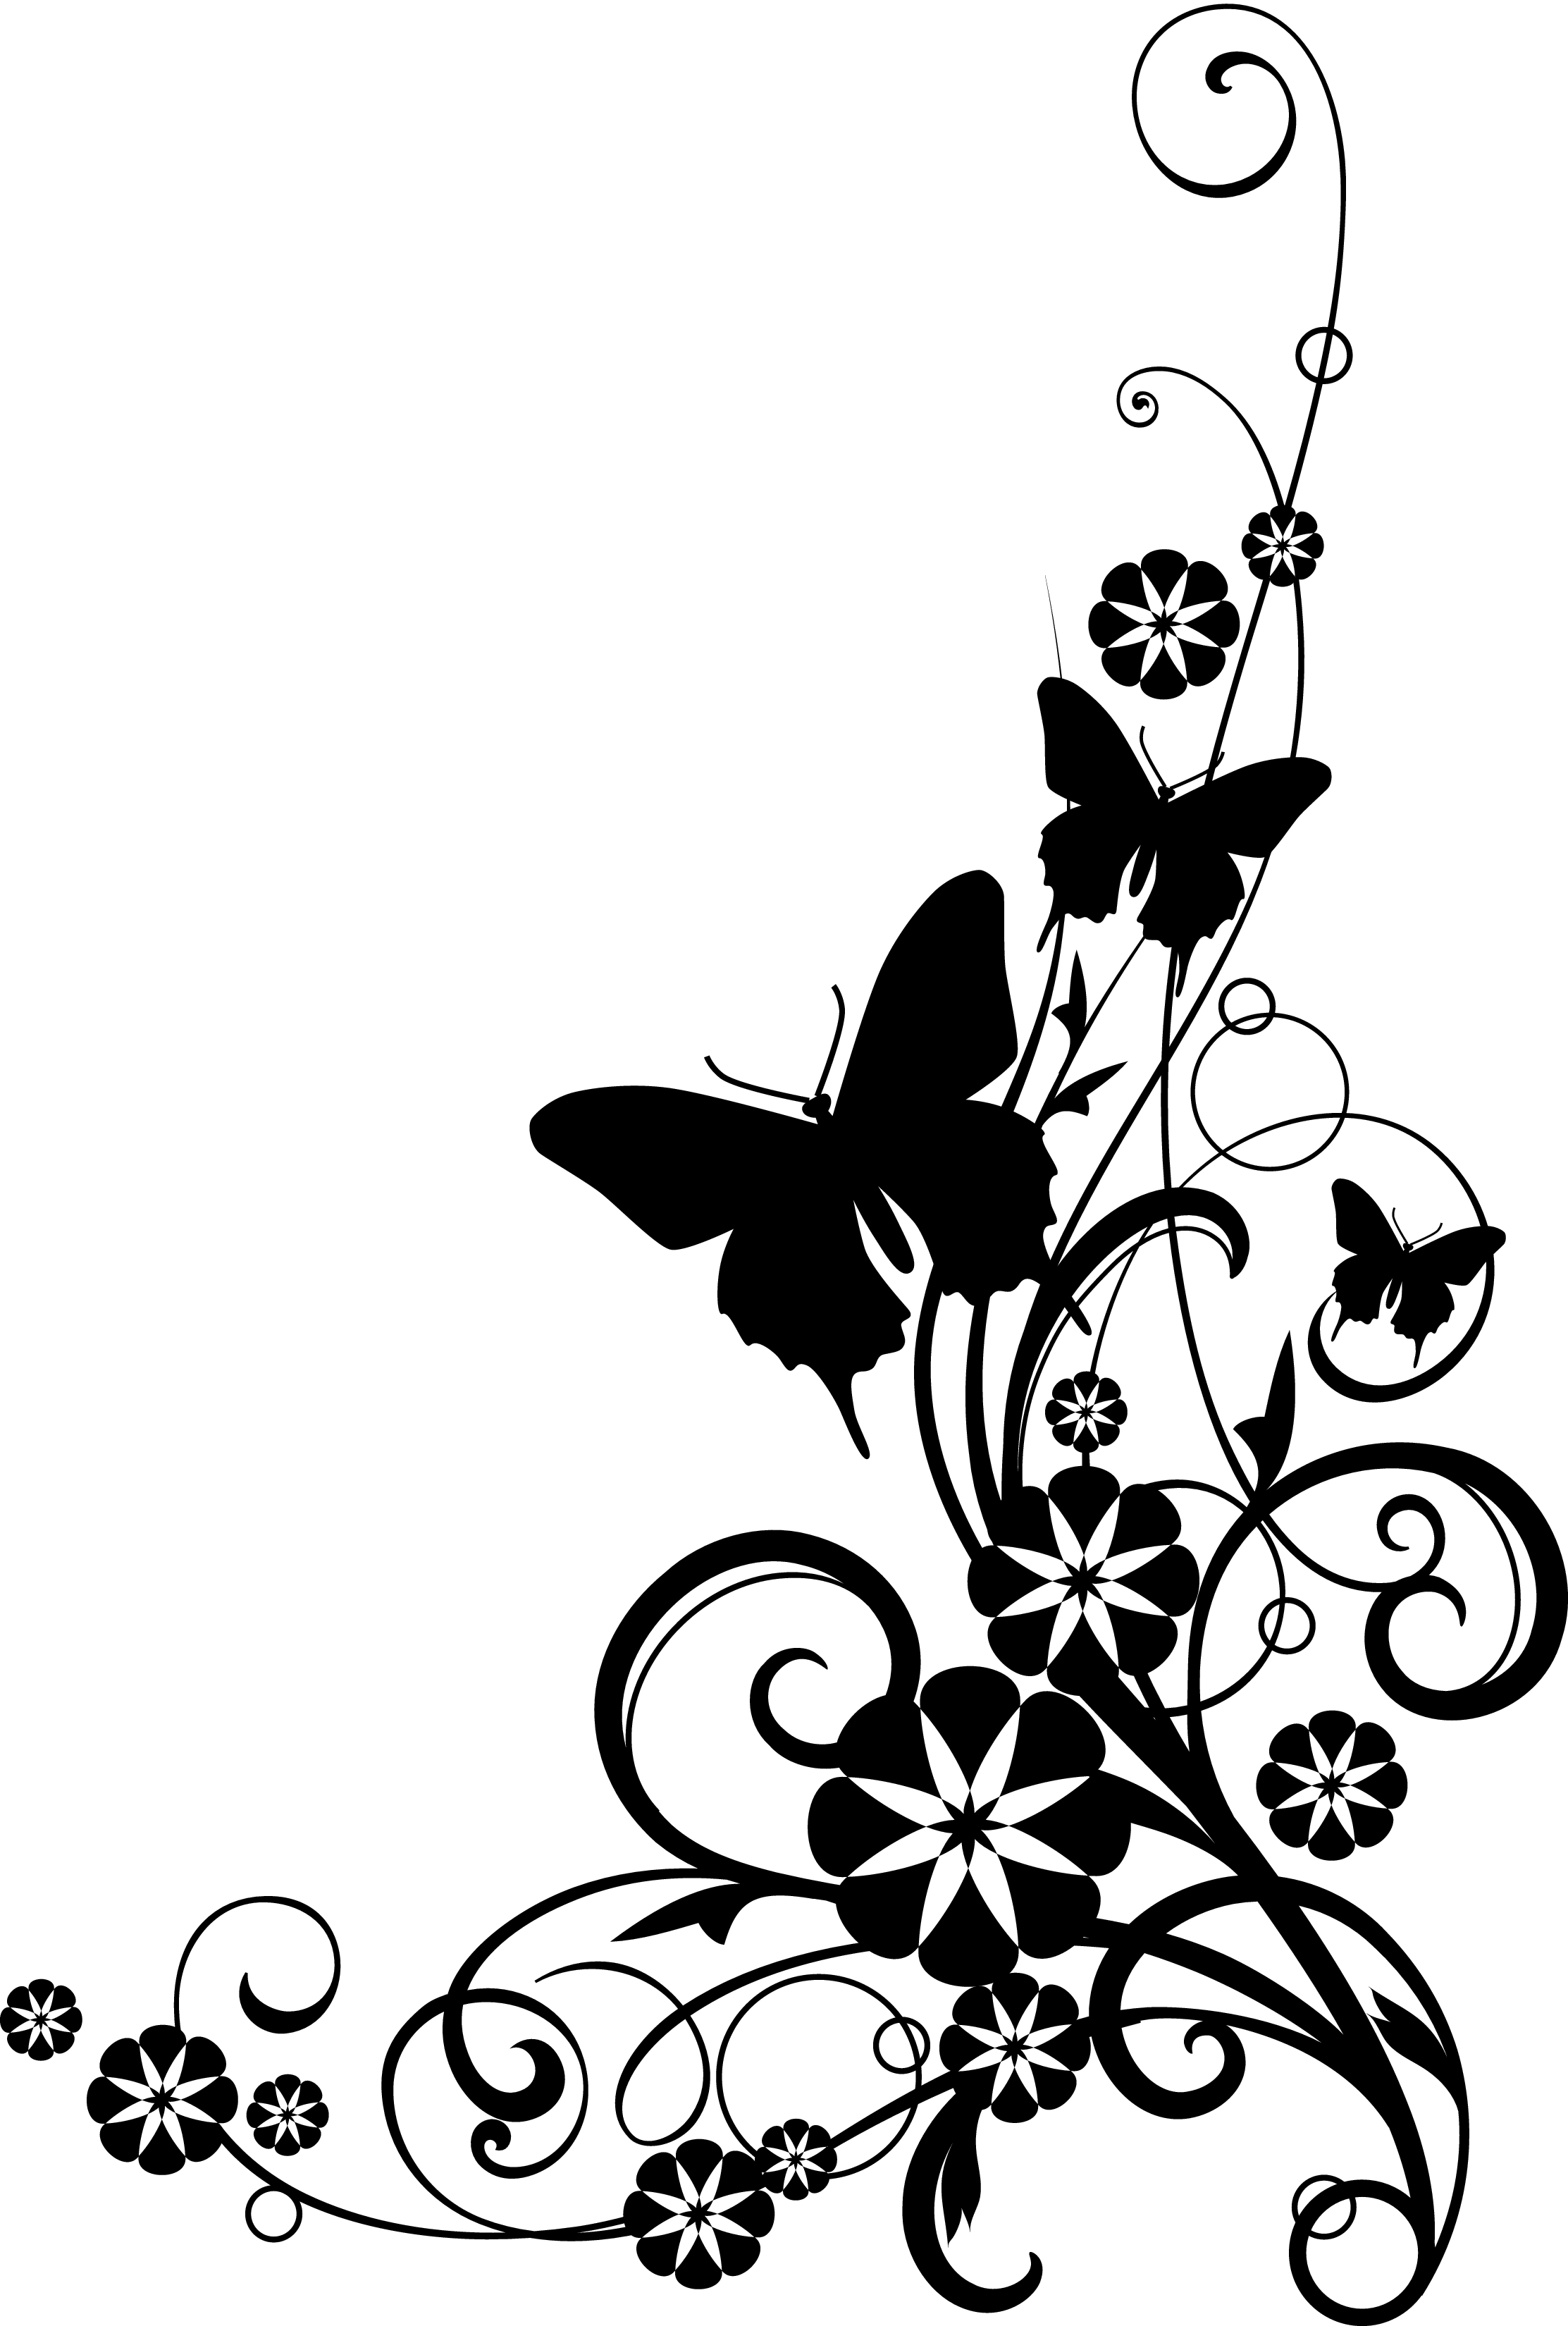 Featured image of post Black And White Floral Design Border : Cute black and white borders.